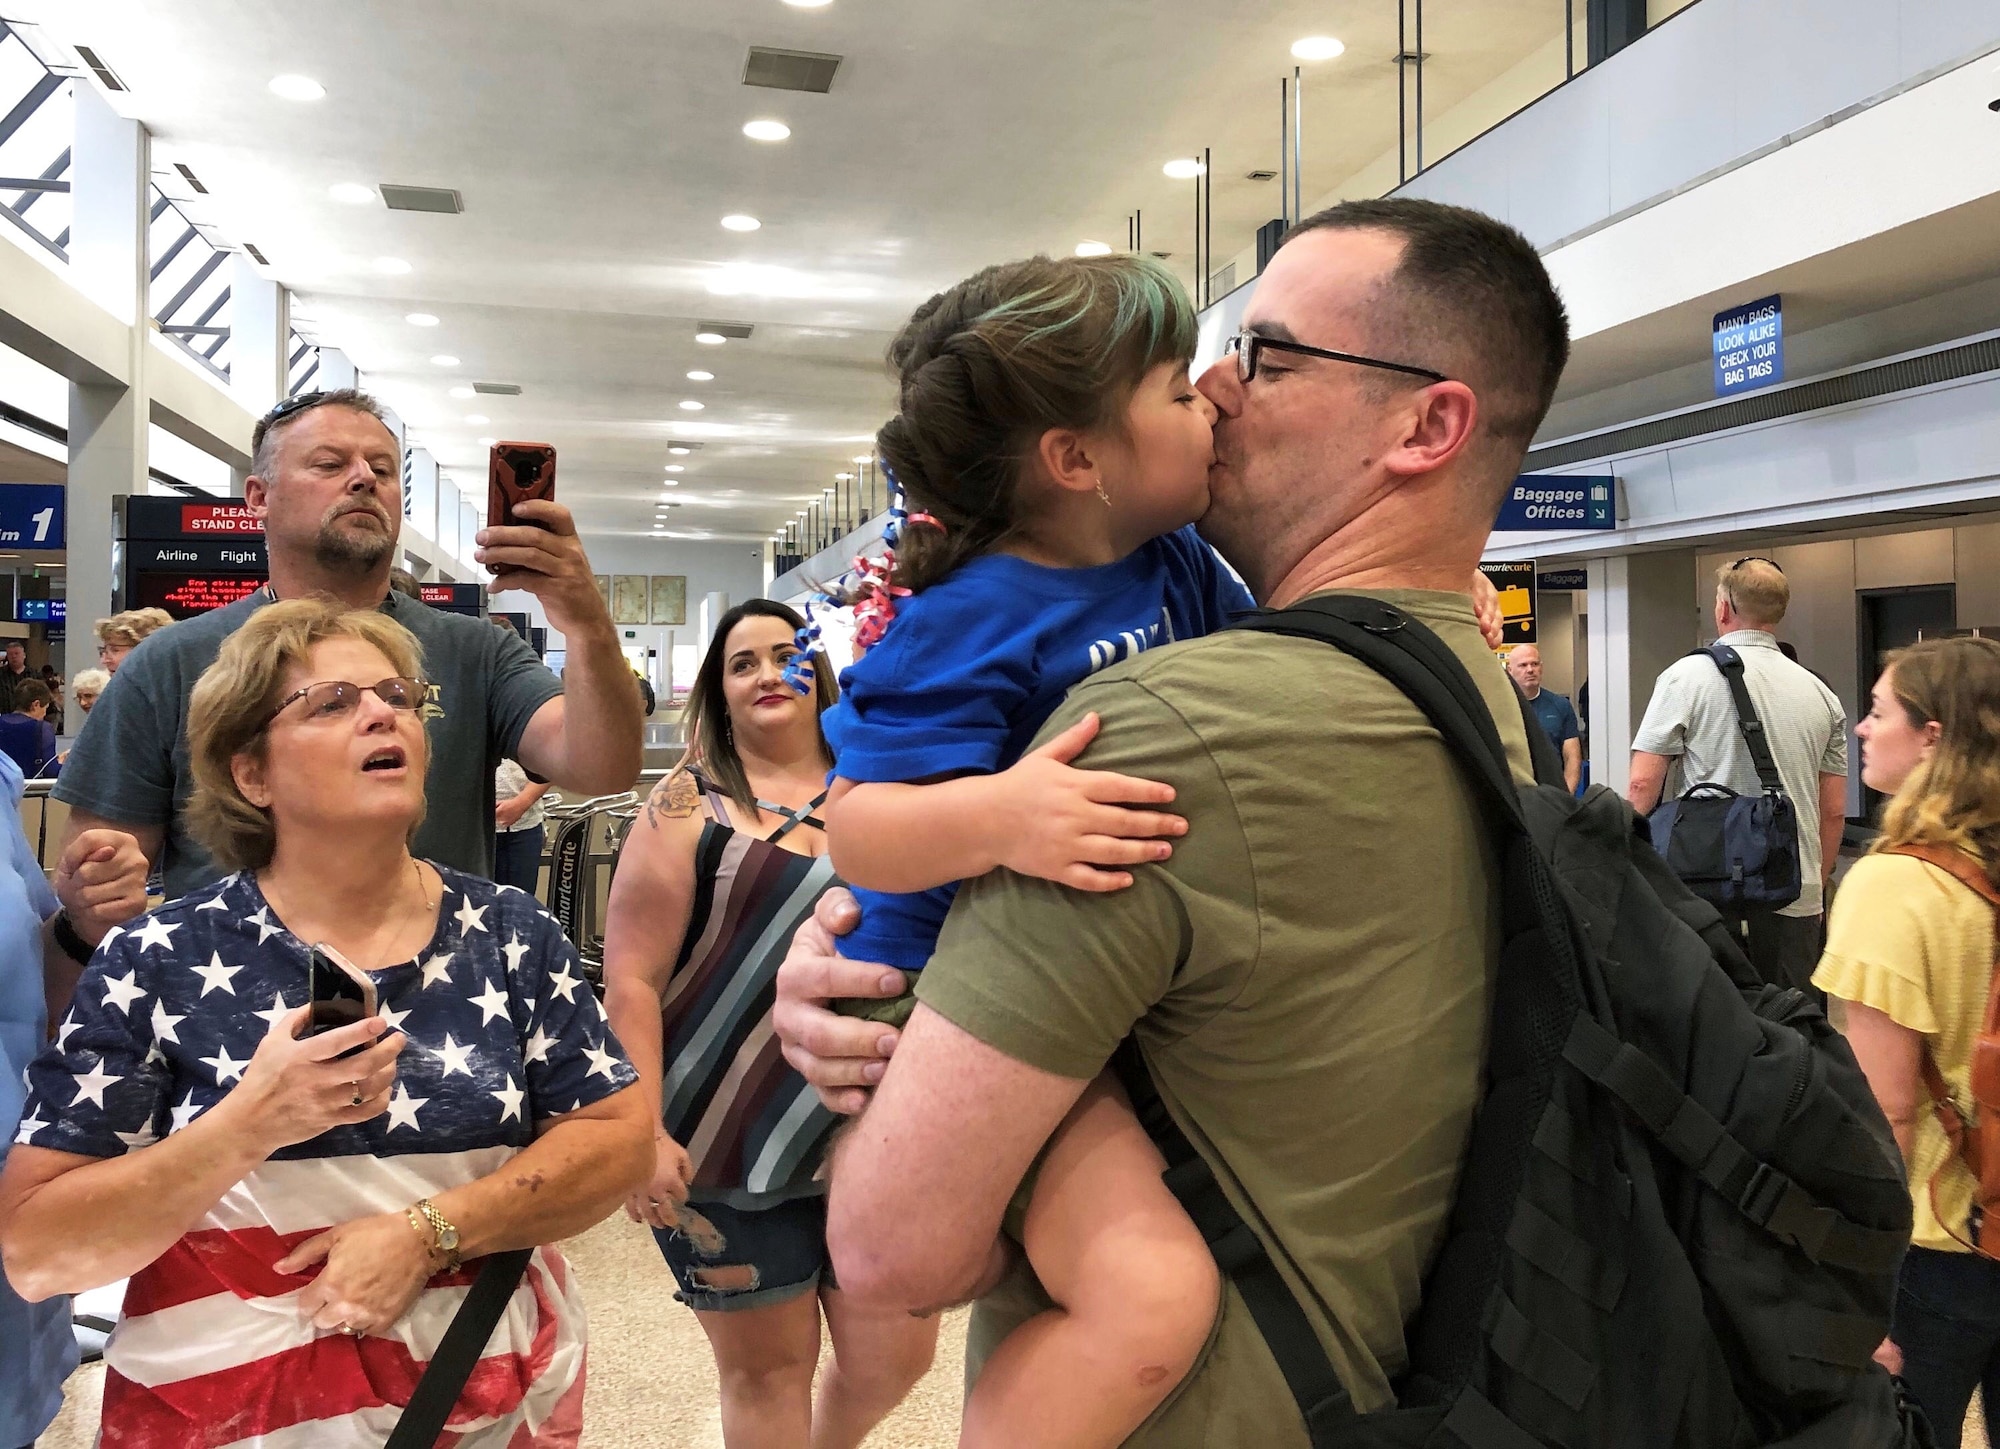 Senior Airman Tyson Kimber from the 419th Maintenance Squadron greets his daughter, Marley, upon returning home July 19 from a three-month deployment to the United Arab Emirates.